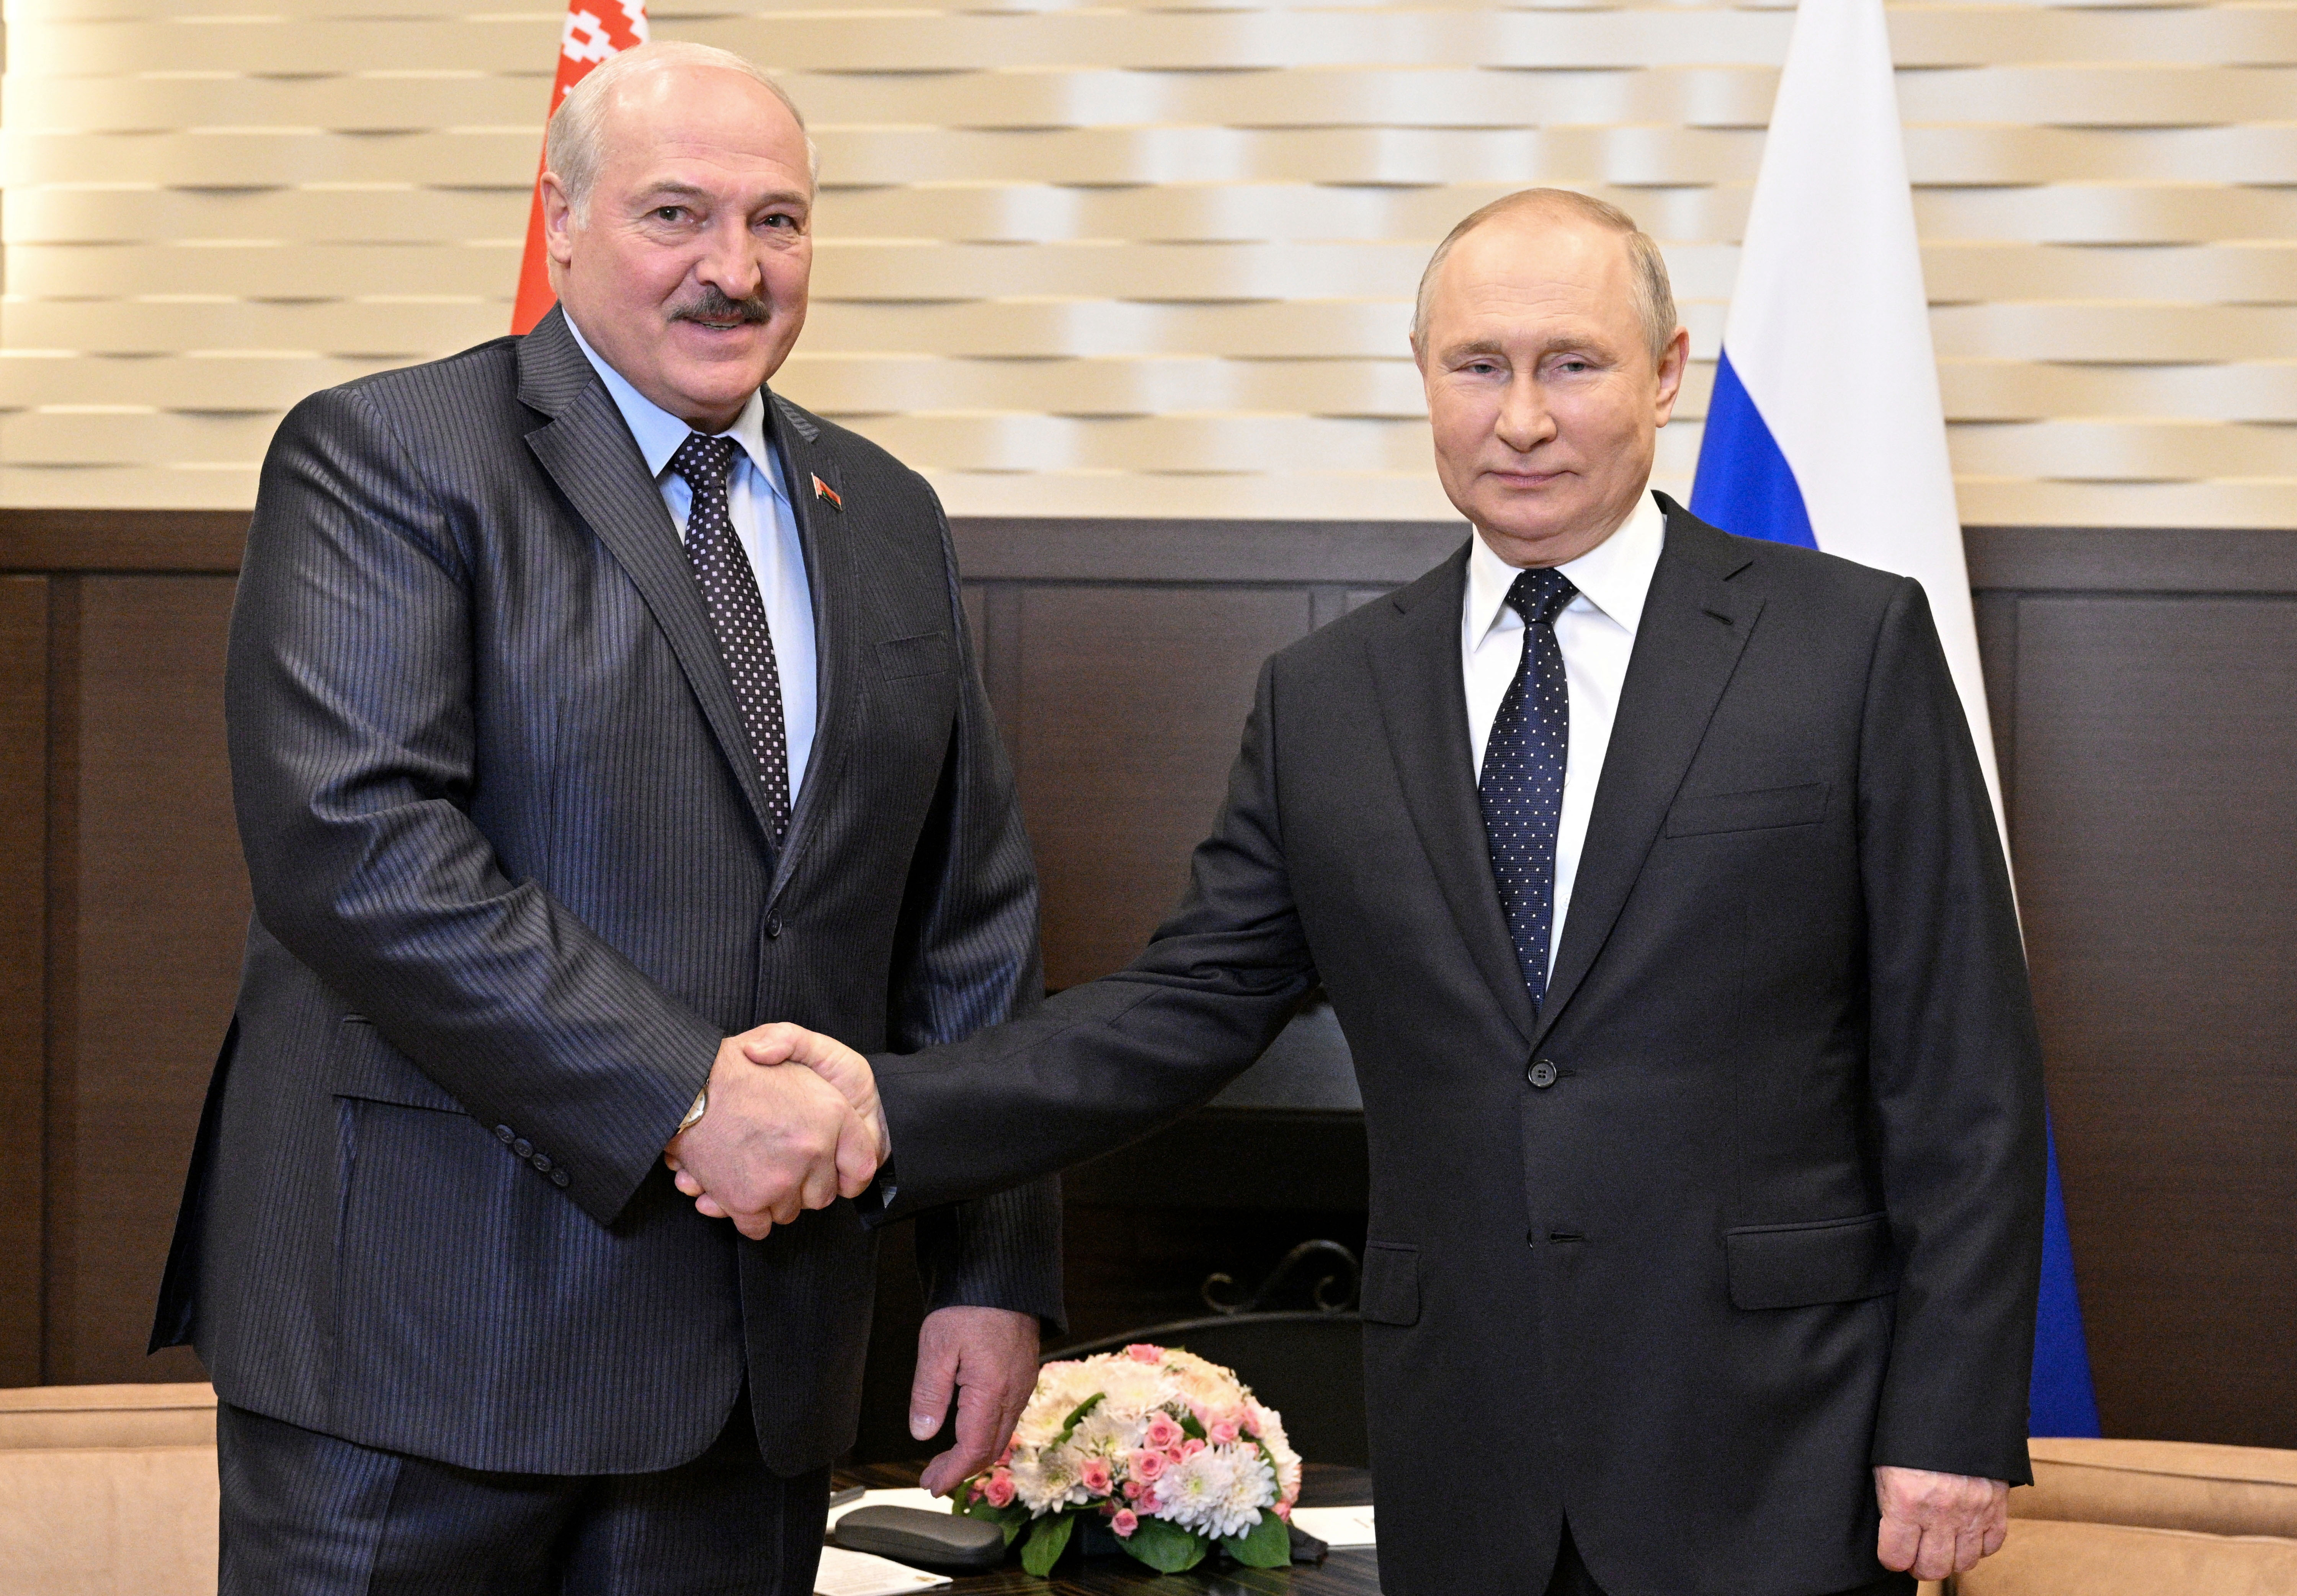 Belarus leader gives Putin unusual gift for his 70th birthday